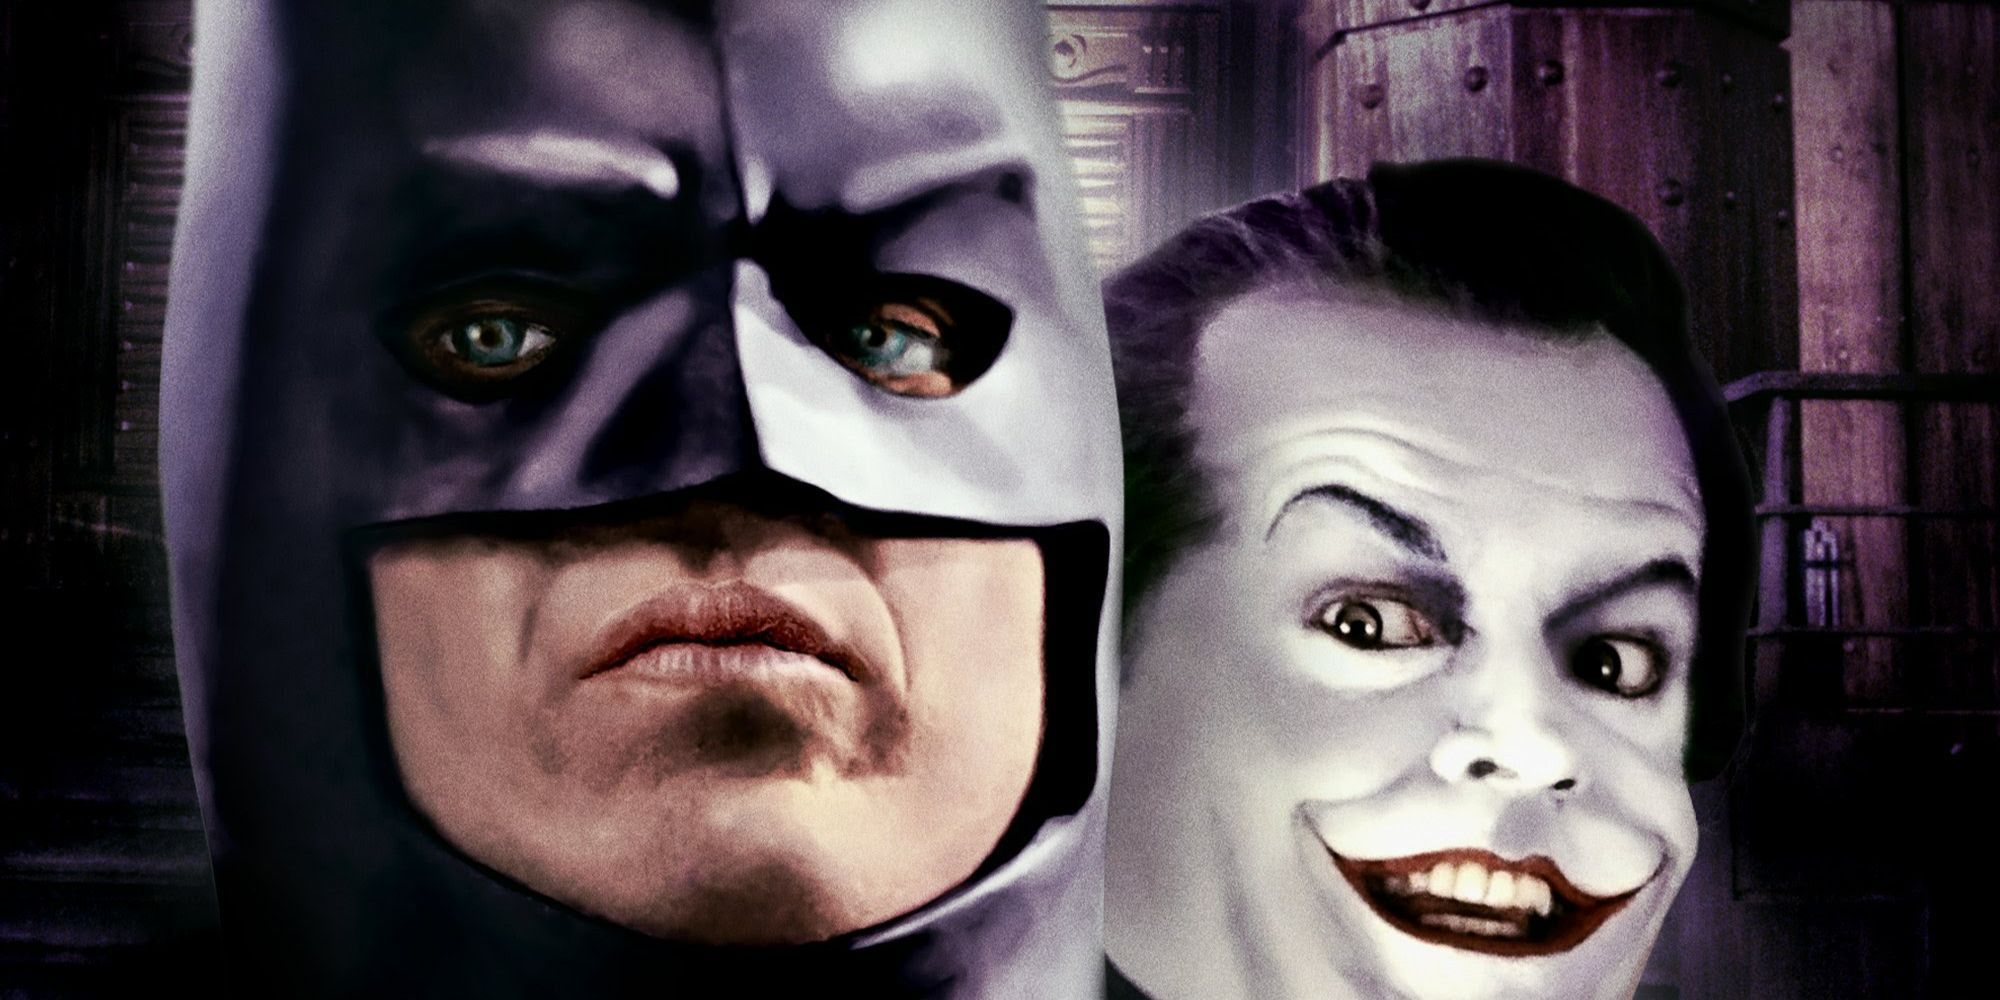 Batman and the Joker from a theatrical poster for the original Batman film